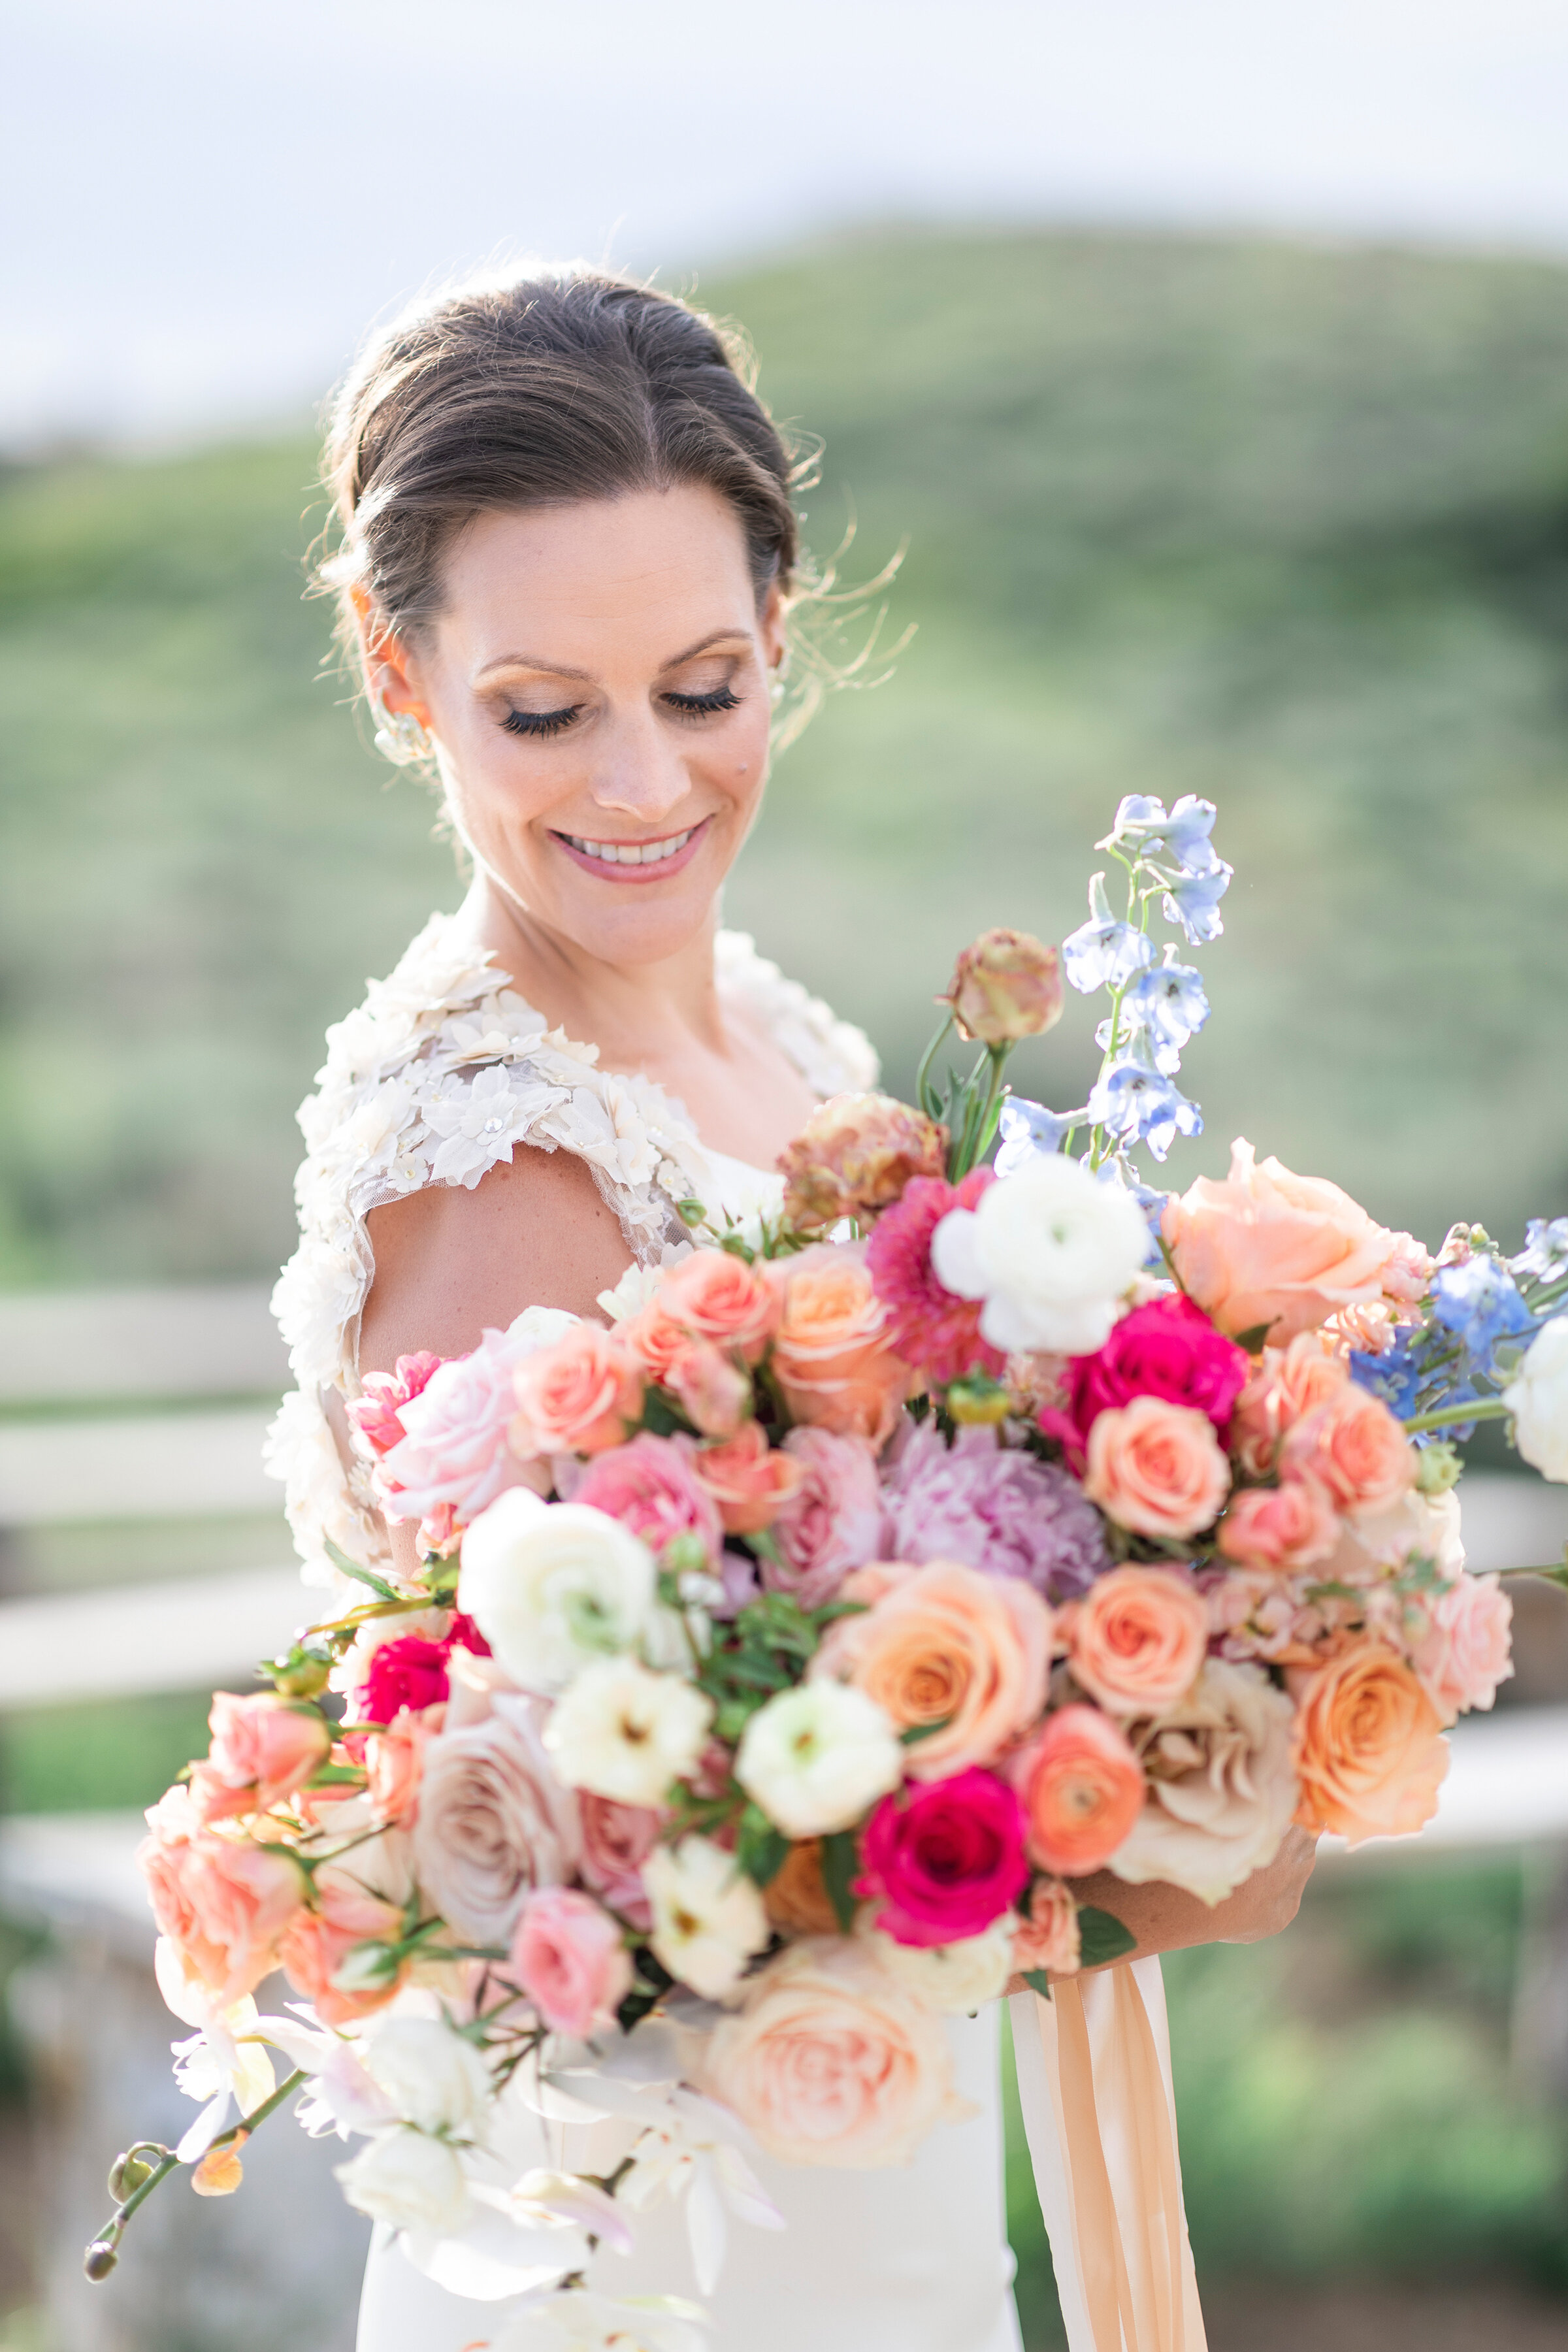  utah mountain bridal shoot featuring a pastel wedding bouquet and accented wedding dress by clarity lane photography in salt lake city utah. pastel pink, peach, white wedding bouquet, flower wedding dress sleeves green mountain background wooden fen